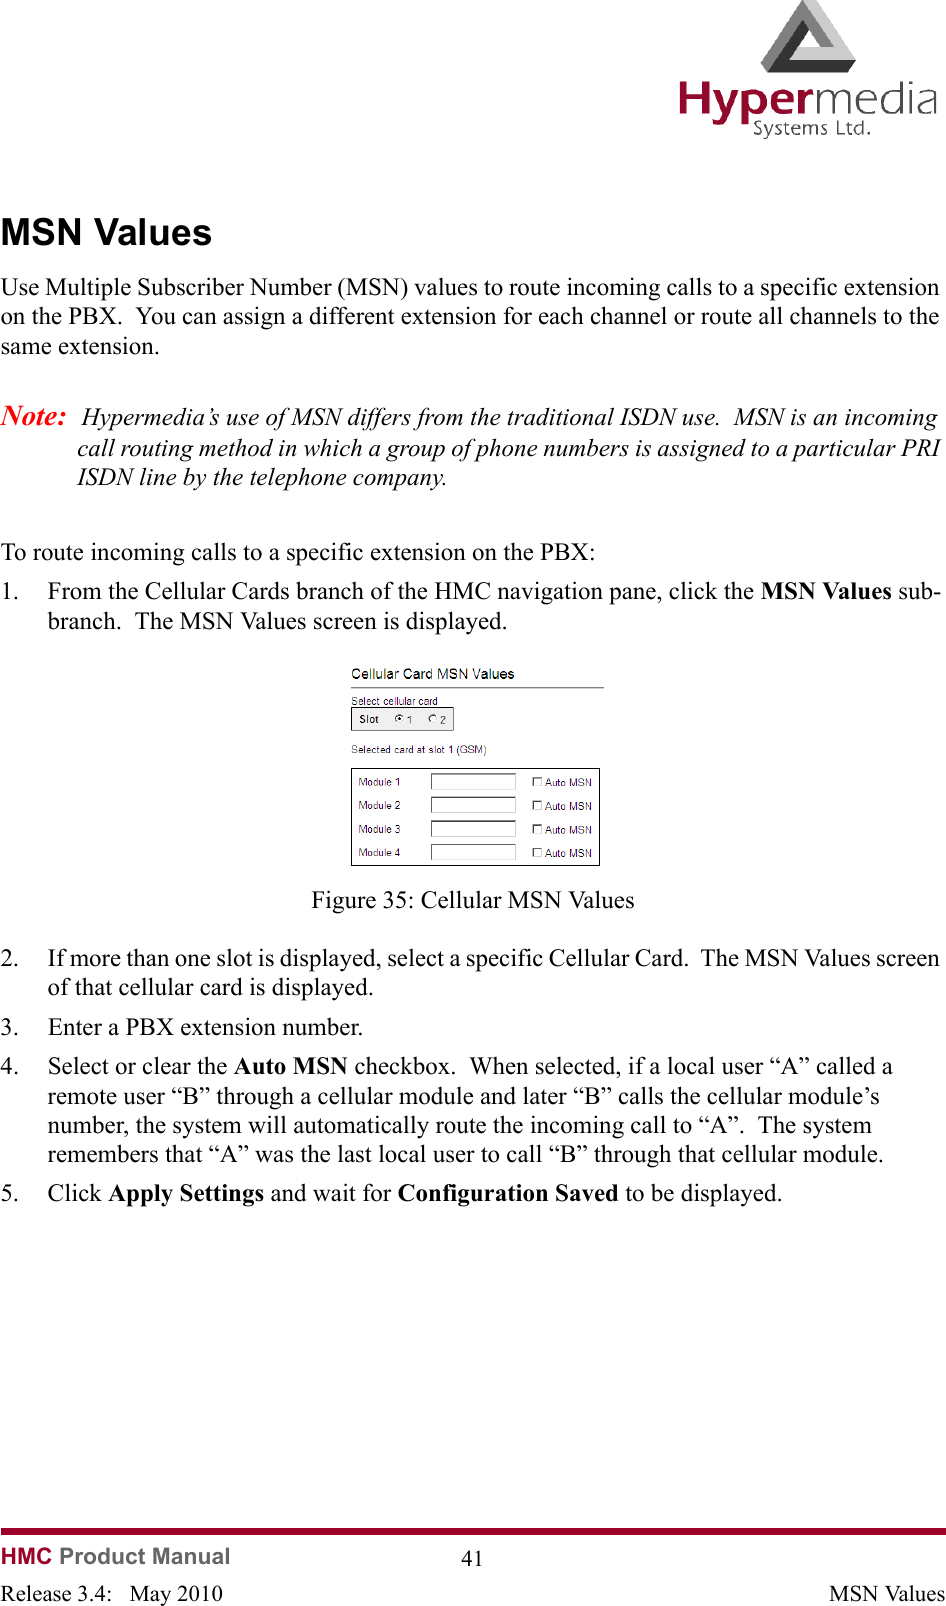 HMC Product Manual  41Release 3.4:   May 2010 MSN ValuesMSN ValuesUse Multiple Subscriber Number (MSN) values to route incoming calls to a specific extension on the PBX.  You can assign a different extension for each channel or route all channels to the same extension.Note:  Hypermedia’s use of MSN differs from the traditional ISDN use.  MSN is an incoming call routing method in which a group of phone numbers is assigned to a particular PRI ISDN line by the telephone company. To route incoming calls to a specific extension on the PBX:1. From the Cellular Cards branch of the HMC navigation pane, click the MSN Values sub-branch.  The MSN Values screen is displayed.              Figure 35: Cellular MSN Values2. If more than one slot is displayed, select a specific Cellular Card.  The MSN Values screen of that cellular card is displayed.3. Enter a PBX extension number.4. Select or clear the Auto MSN checkbox.  When selected, if a local user “A” called a remote user “B” through a cellular module and later “B” calls the cellular module’s number, the system will automatically route the incoming call to “A”.  The system remembers that “A” was the last local user to call “B” through that cellular module.5. Click Apply Settings and wait for Configuration Saved to be displayed.